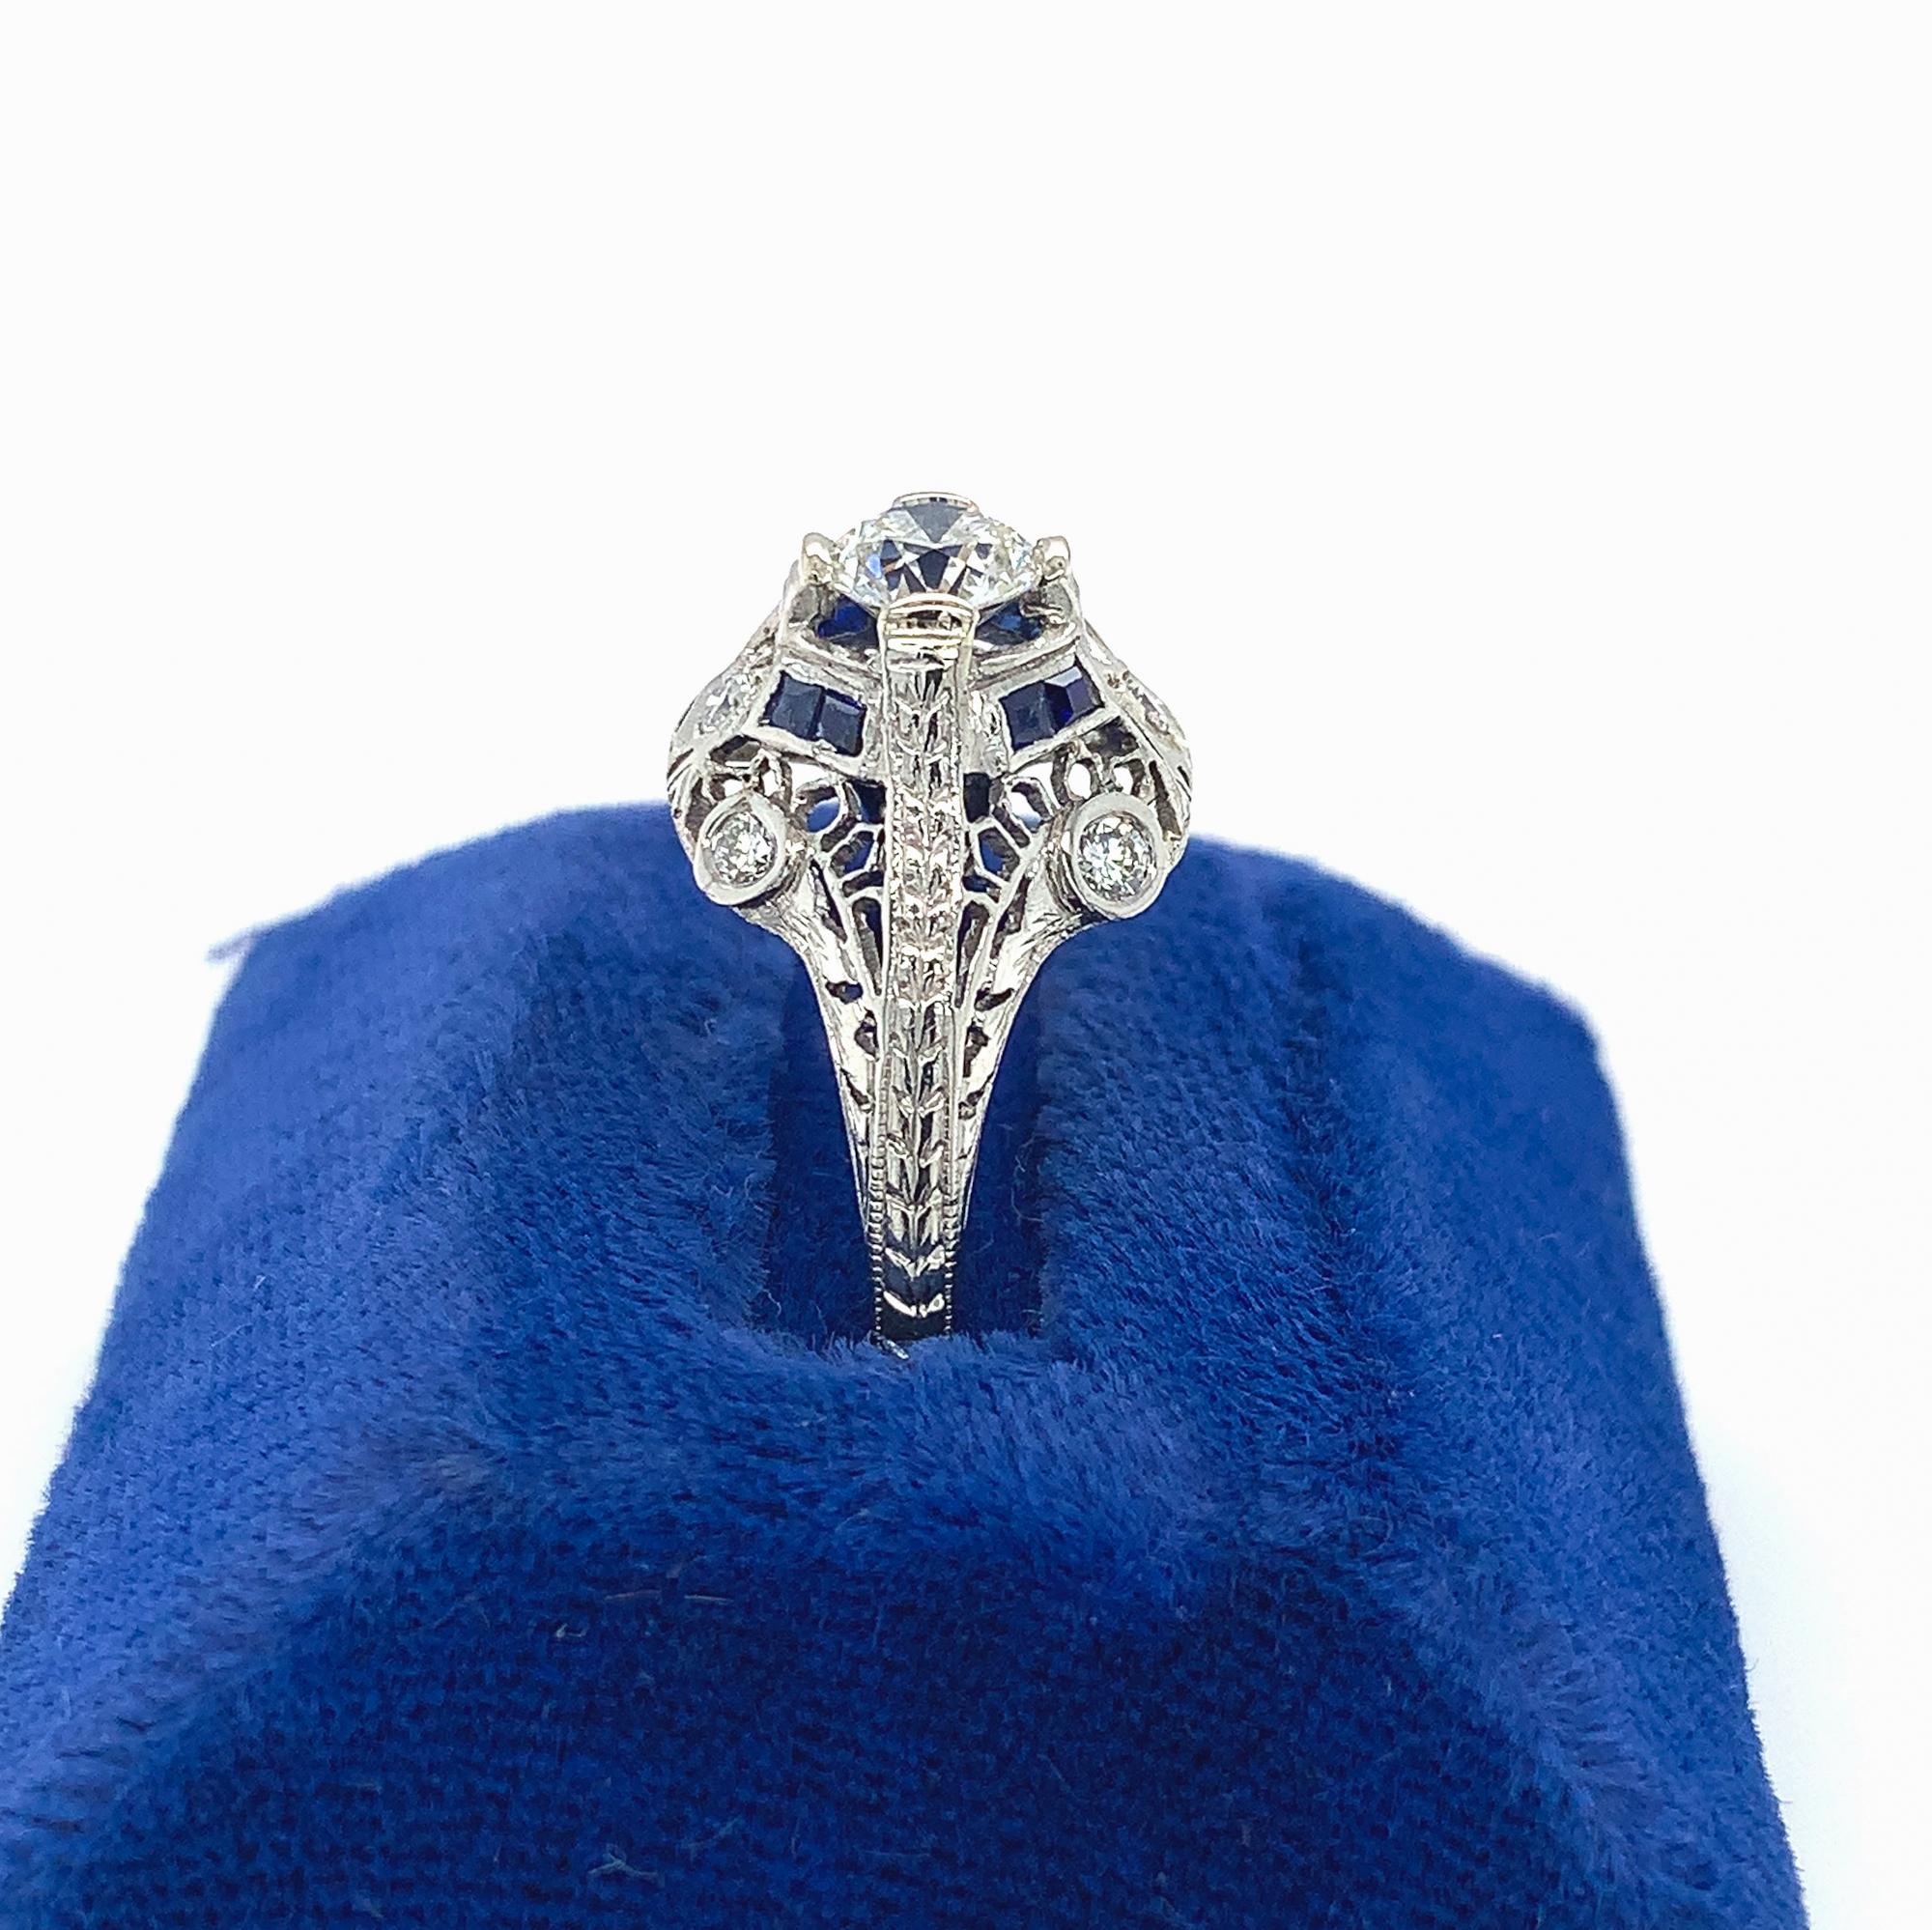 Art Deco platinum filigree ring featuring an European cut diamond weighing .62cts with GIA report. GIA report #2225056999 states H color and I1 clarity. The diamond measures 5.41mm x 5.47mm x 3.29mm. There are 8 specialty caliber French cut